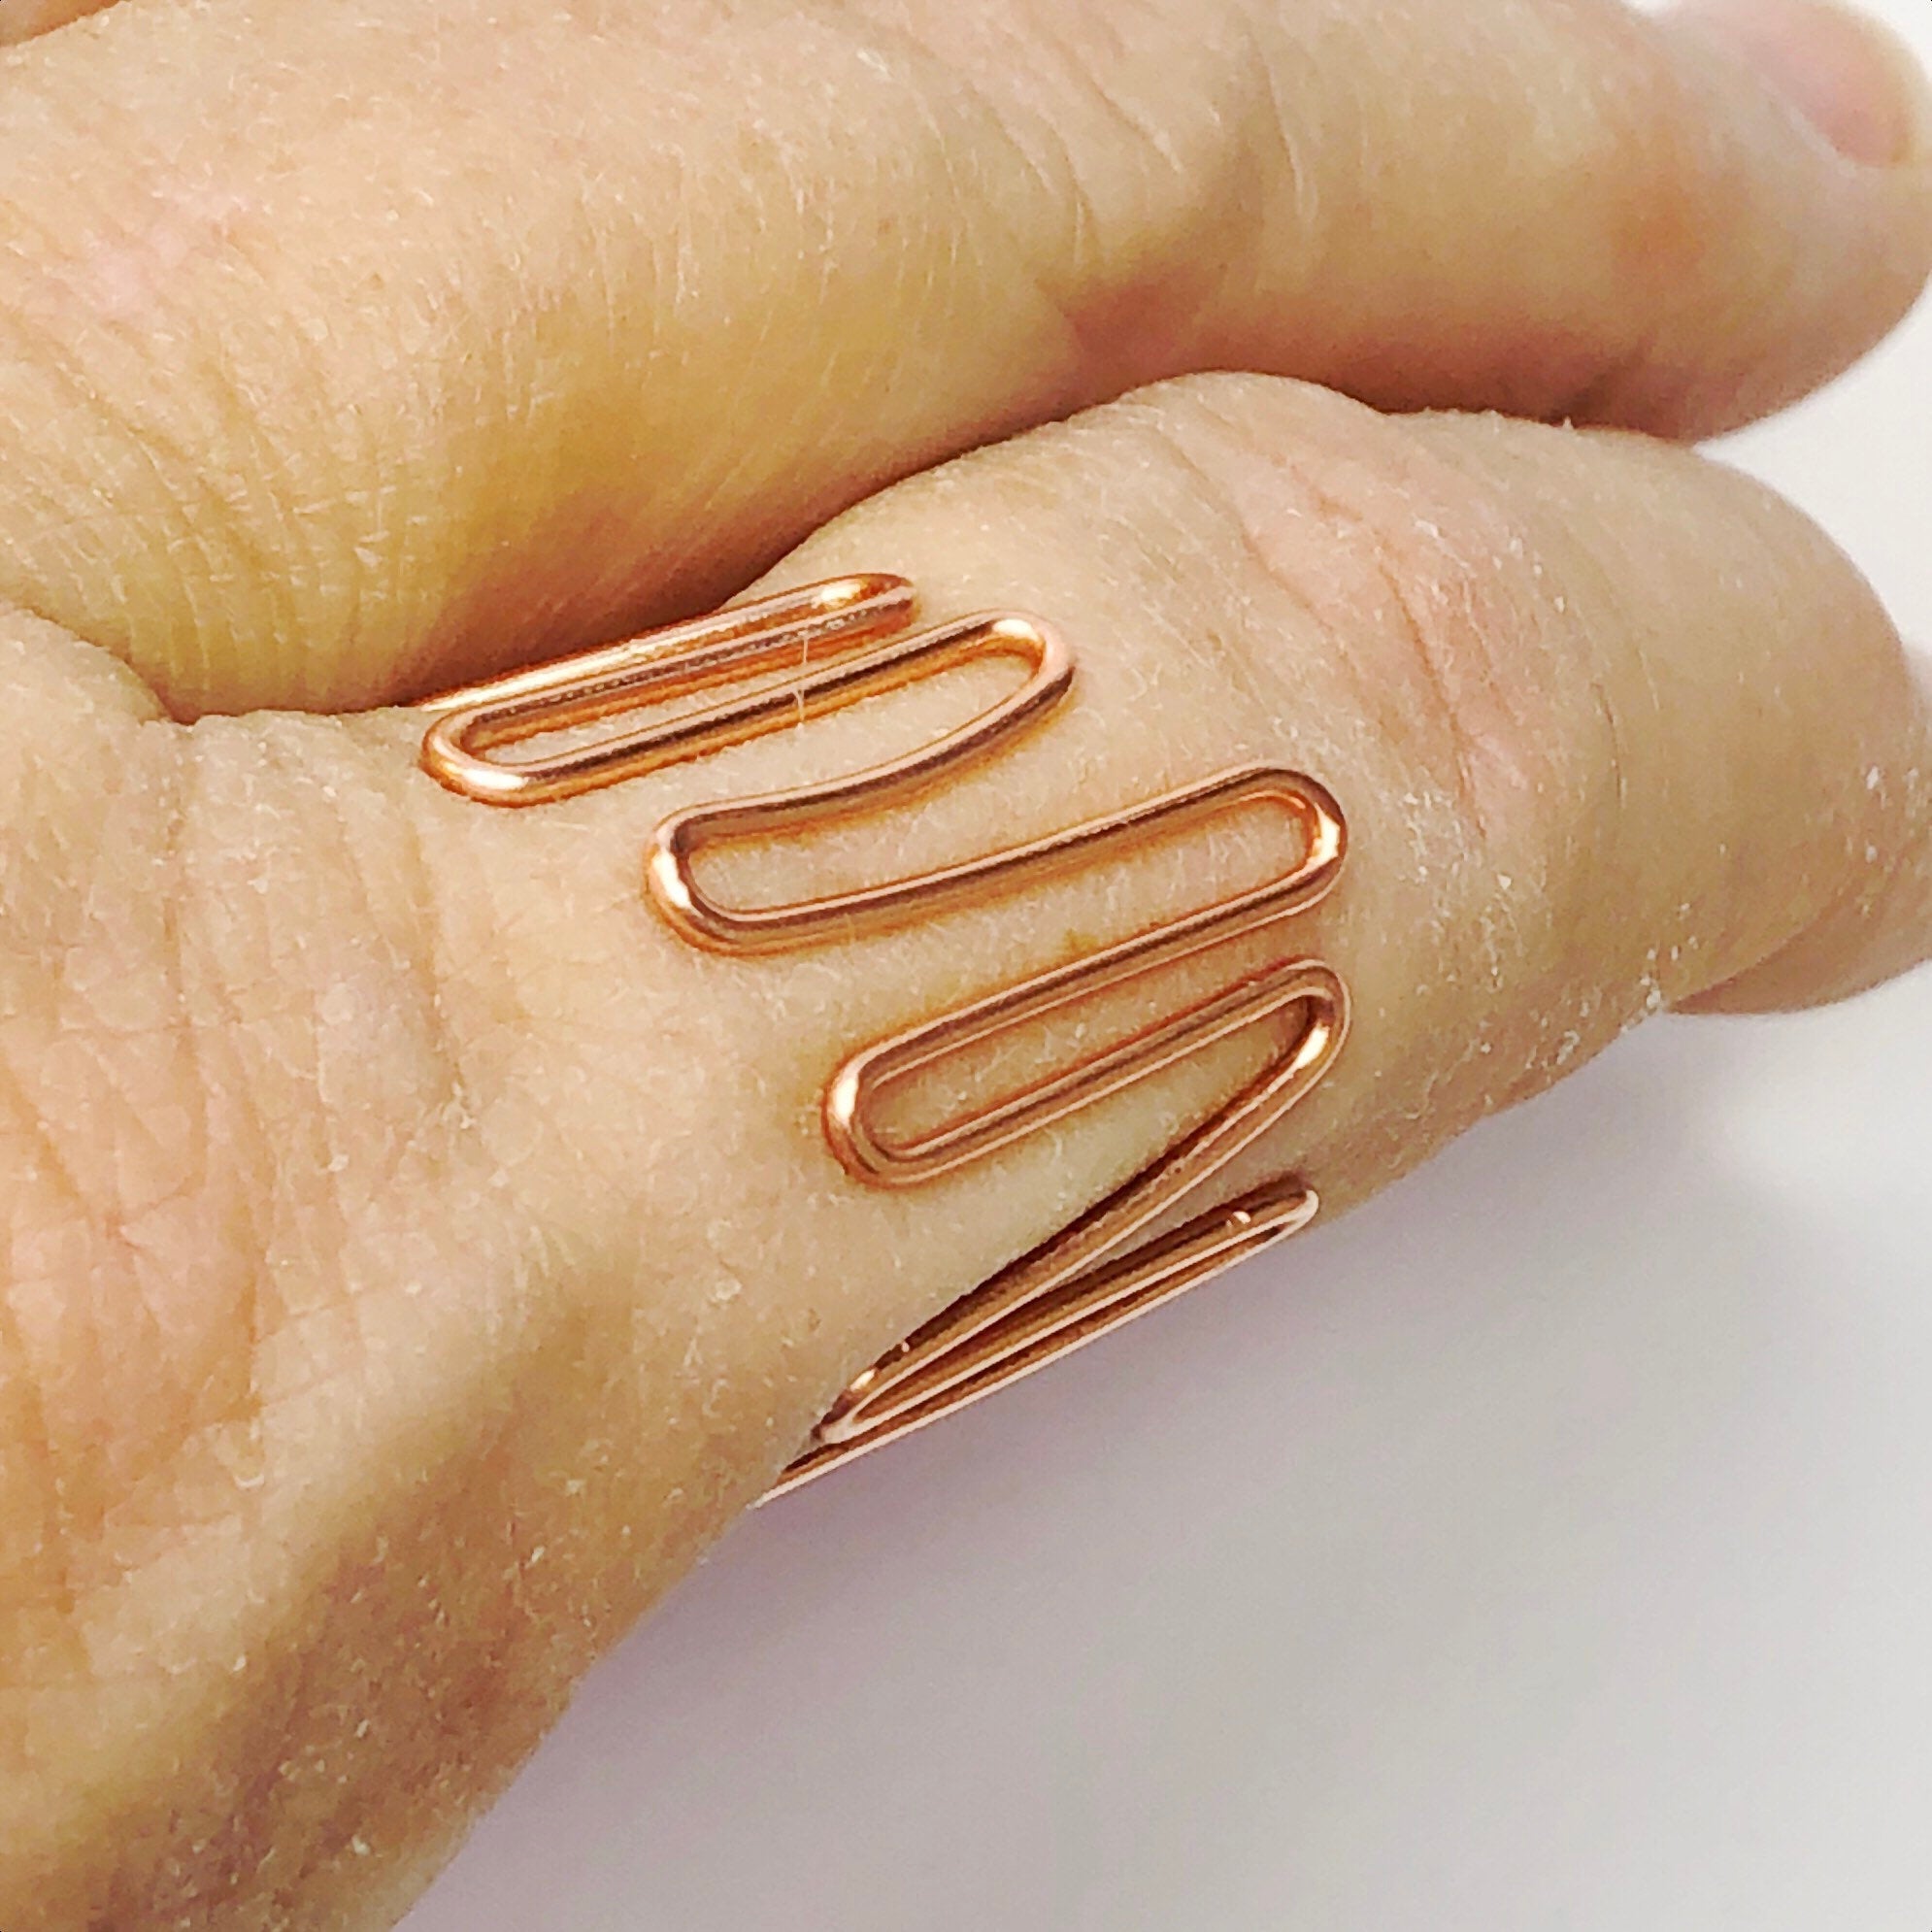 Rose gold copper thumb ring • Wavy wire adjustable ring • Serpentine twist ring • S wave geometric jewelry • Irregular shape tube band